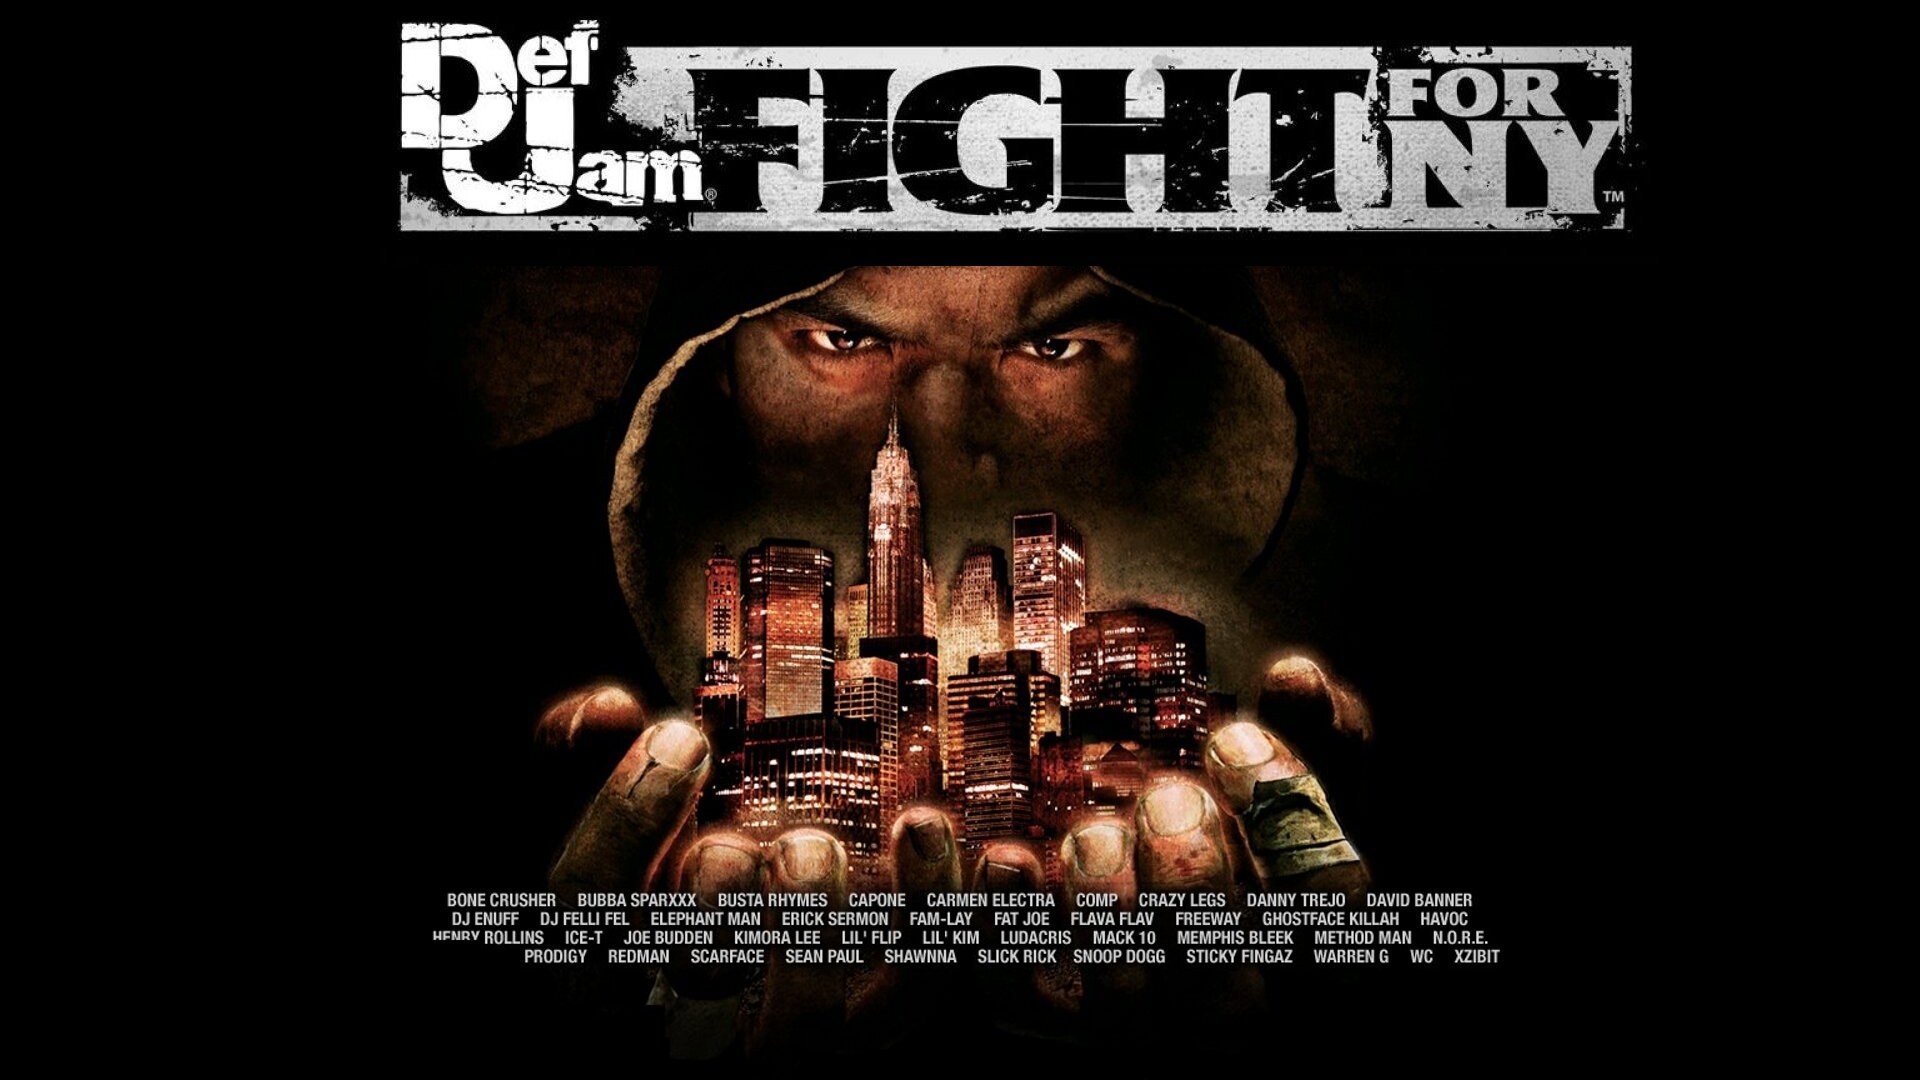 Def Jam Fight For Ny HD Wallpaper Background Image